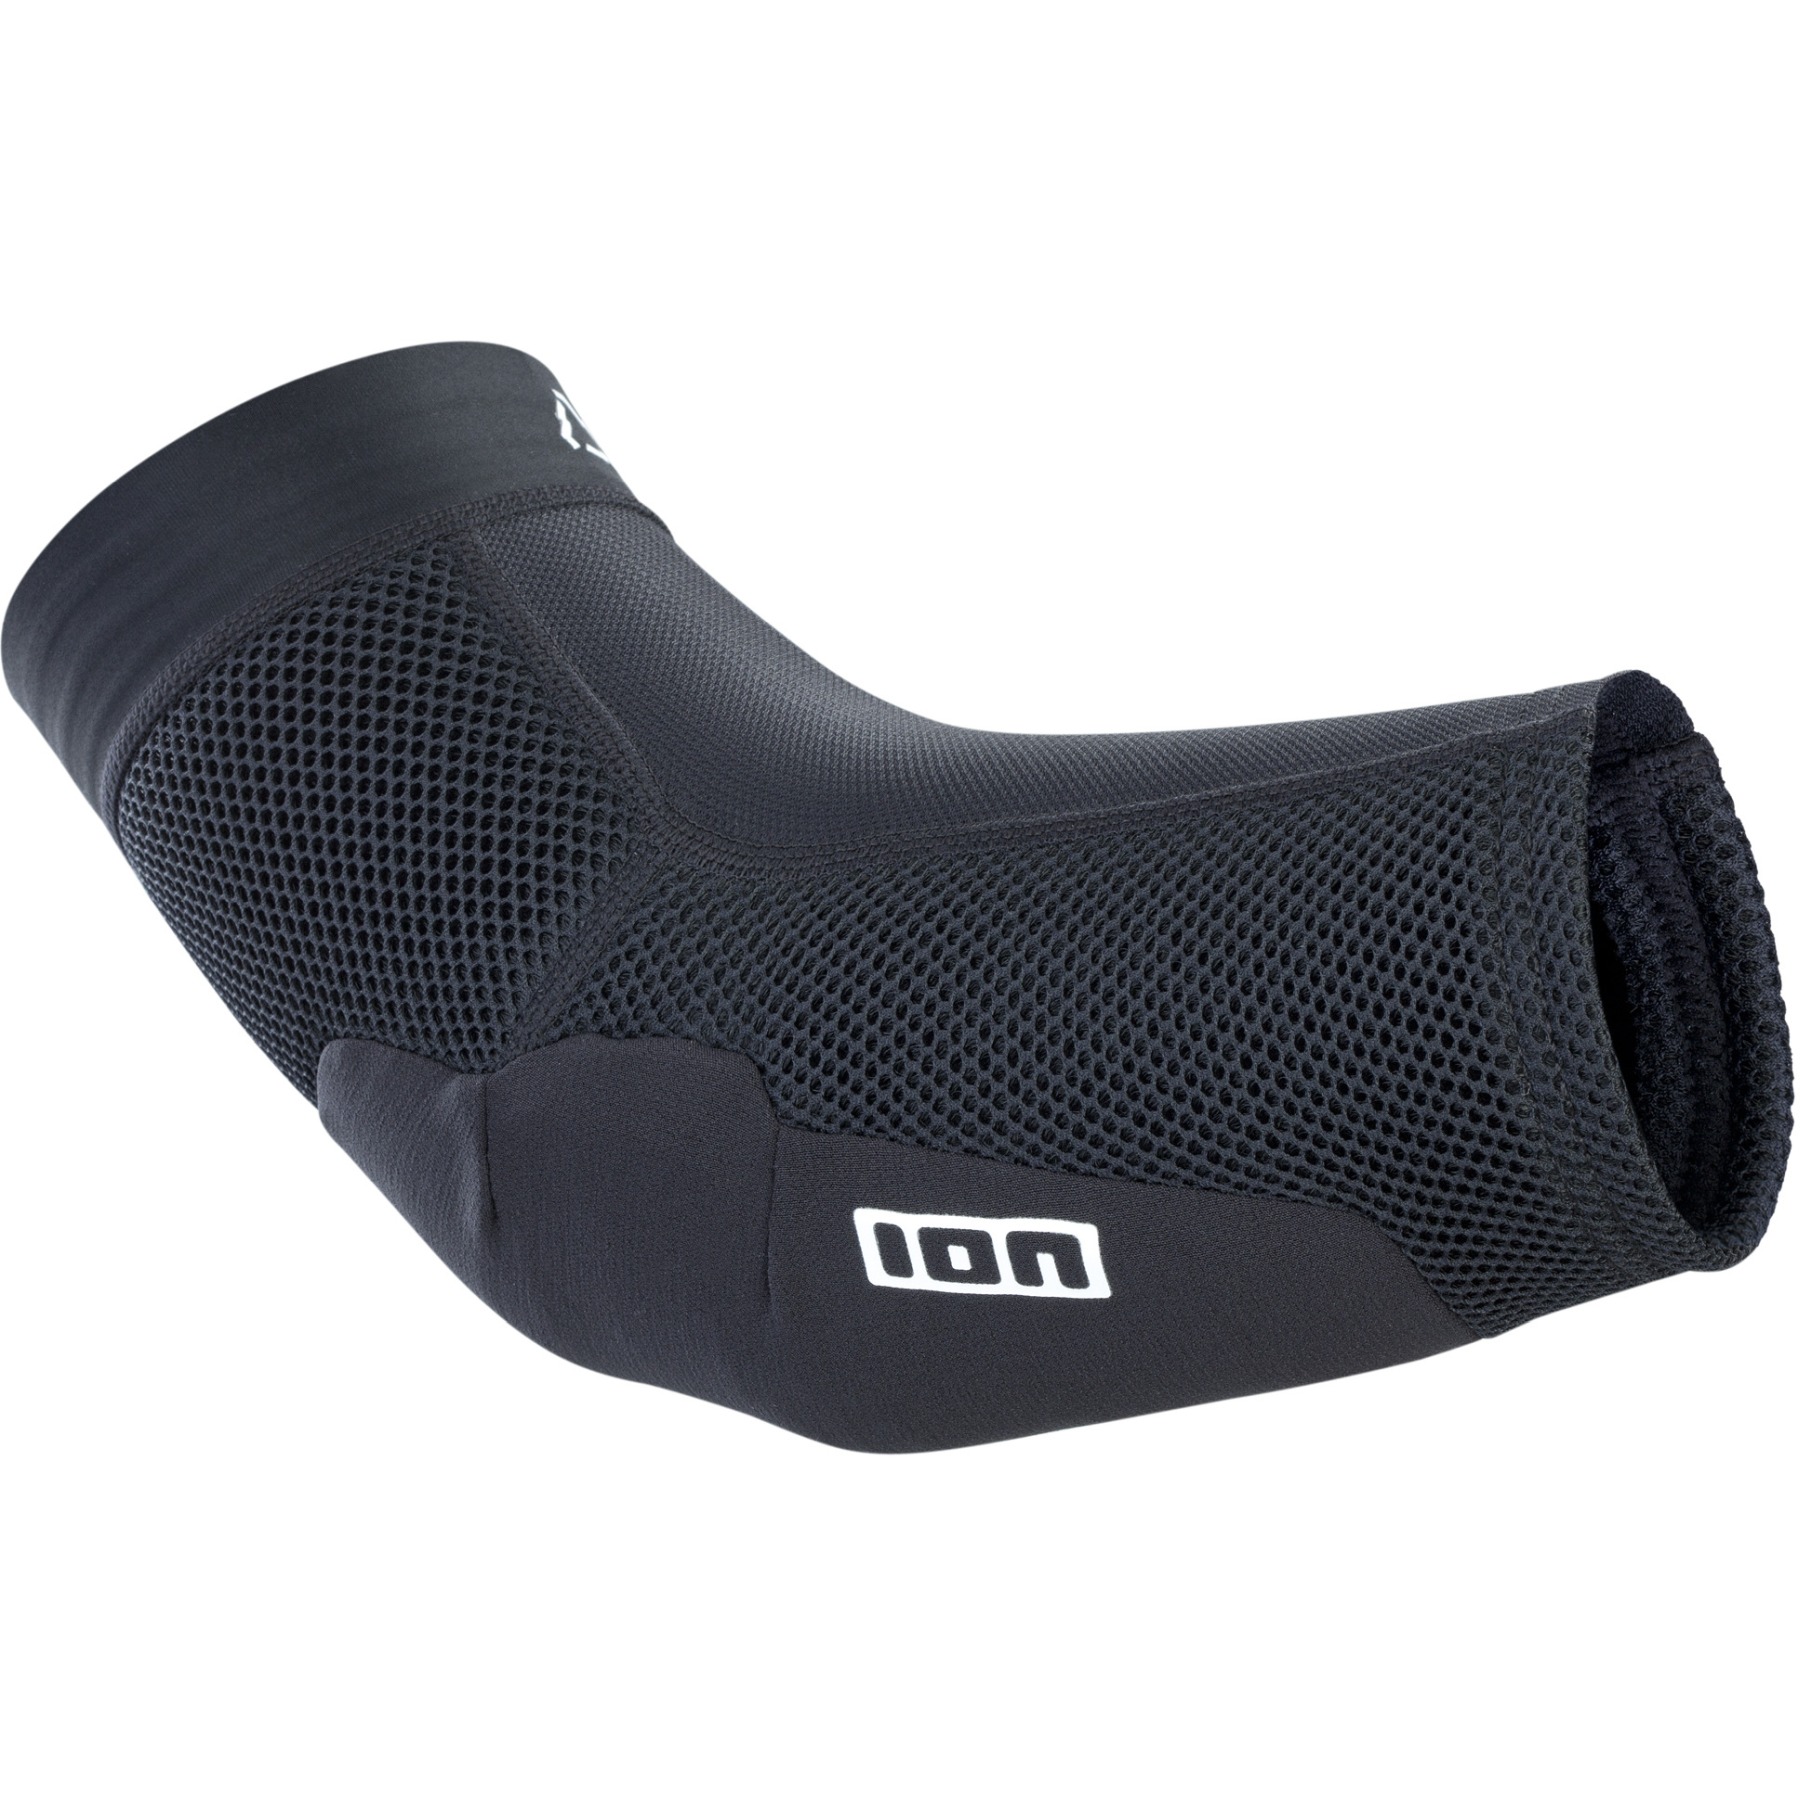 Image of ION Bike Protection E-Sleeve Elbow Guards - Black